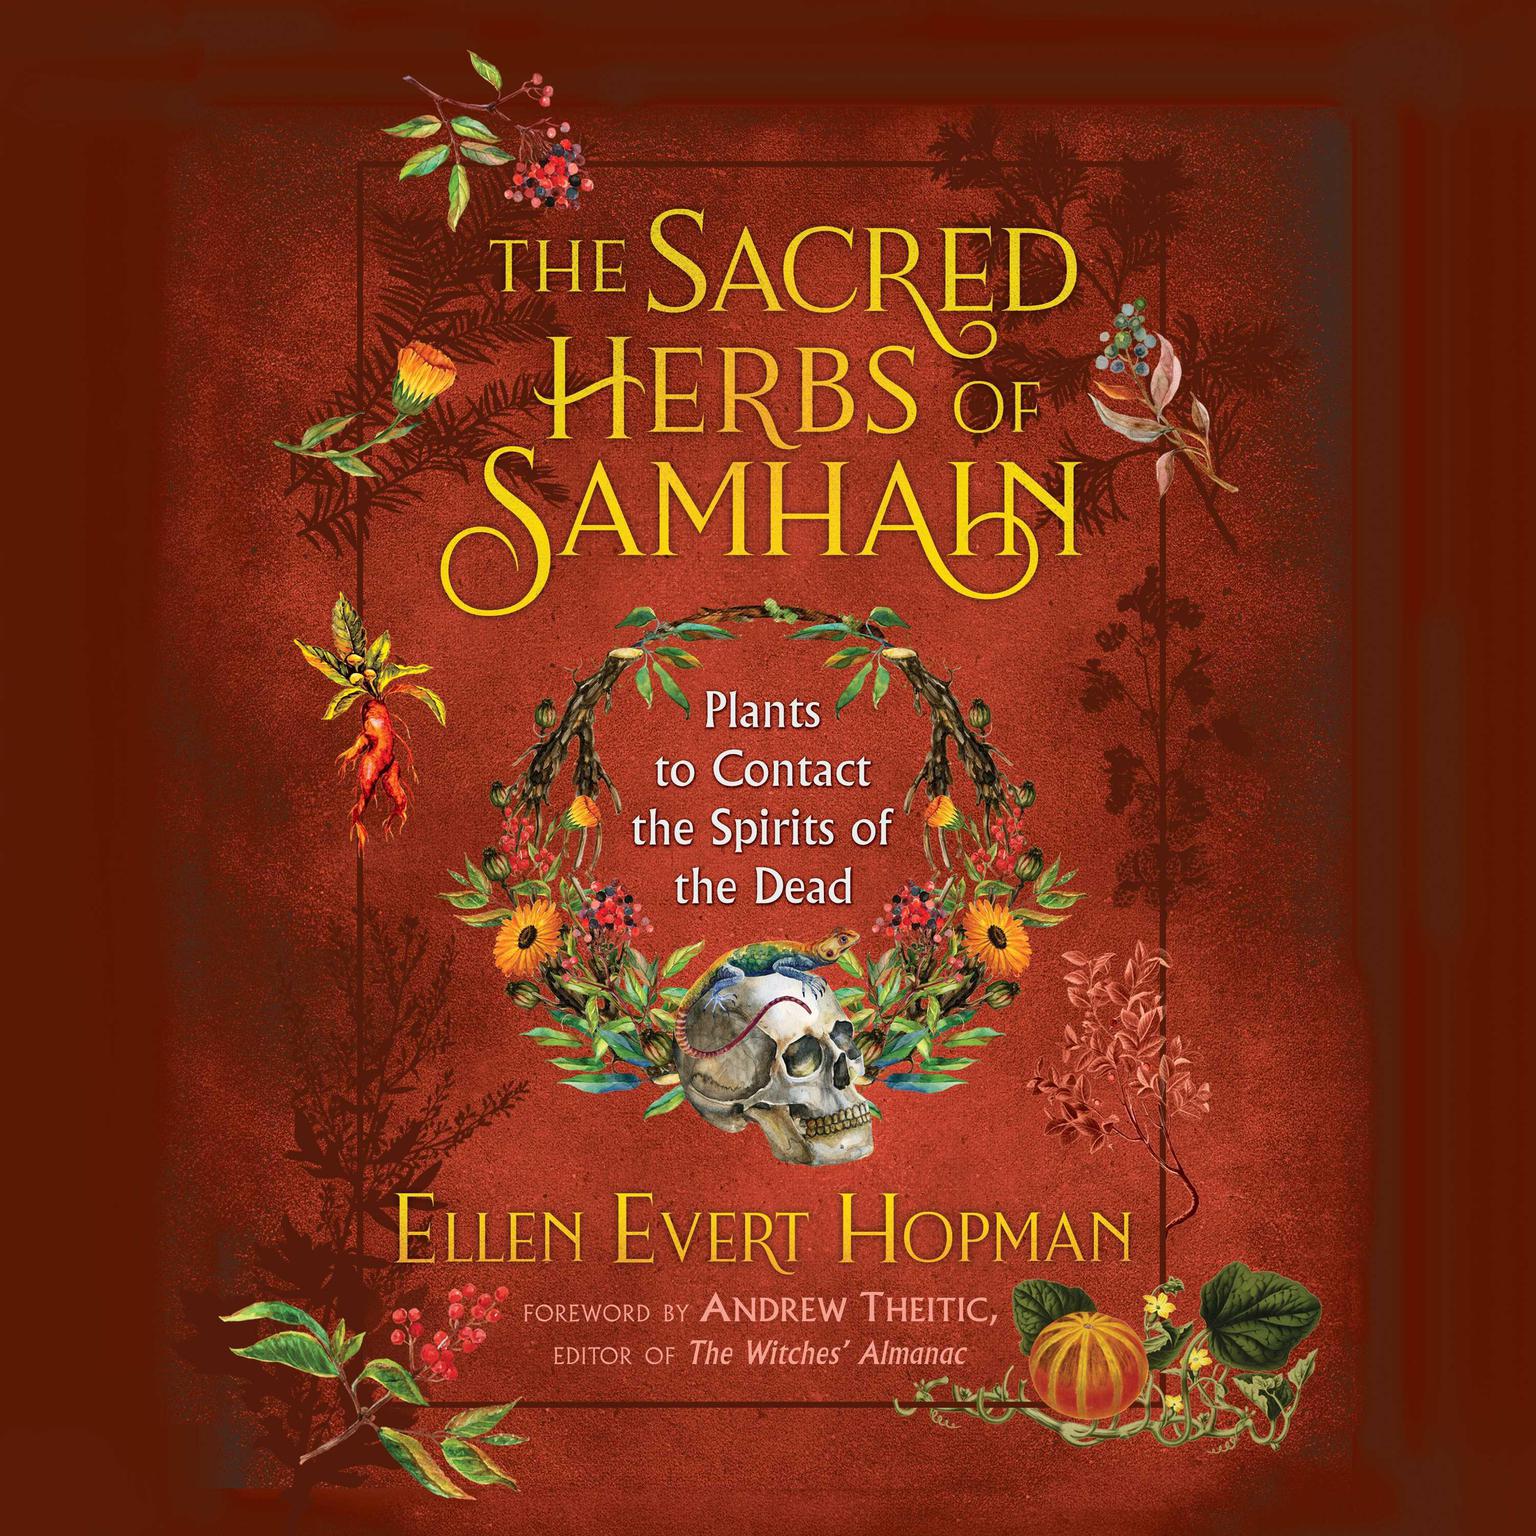 The Sacred Herbs of Samhain: Plants to Contact the Spirits of the Dead Audiobook, by Ellen Evert Hopman